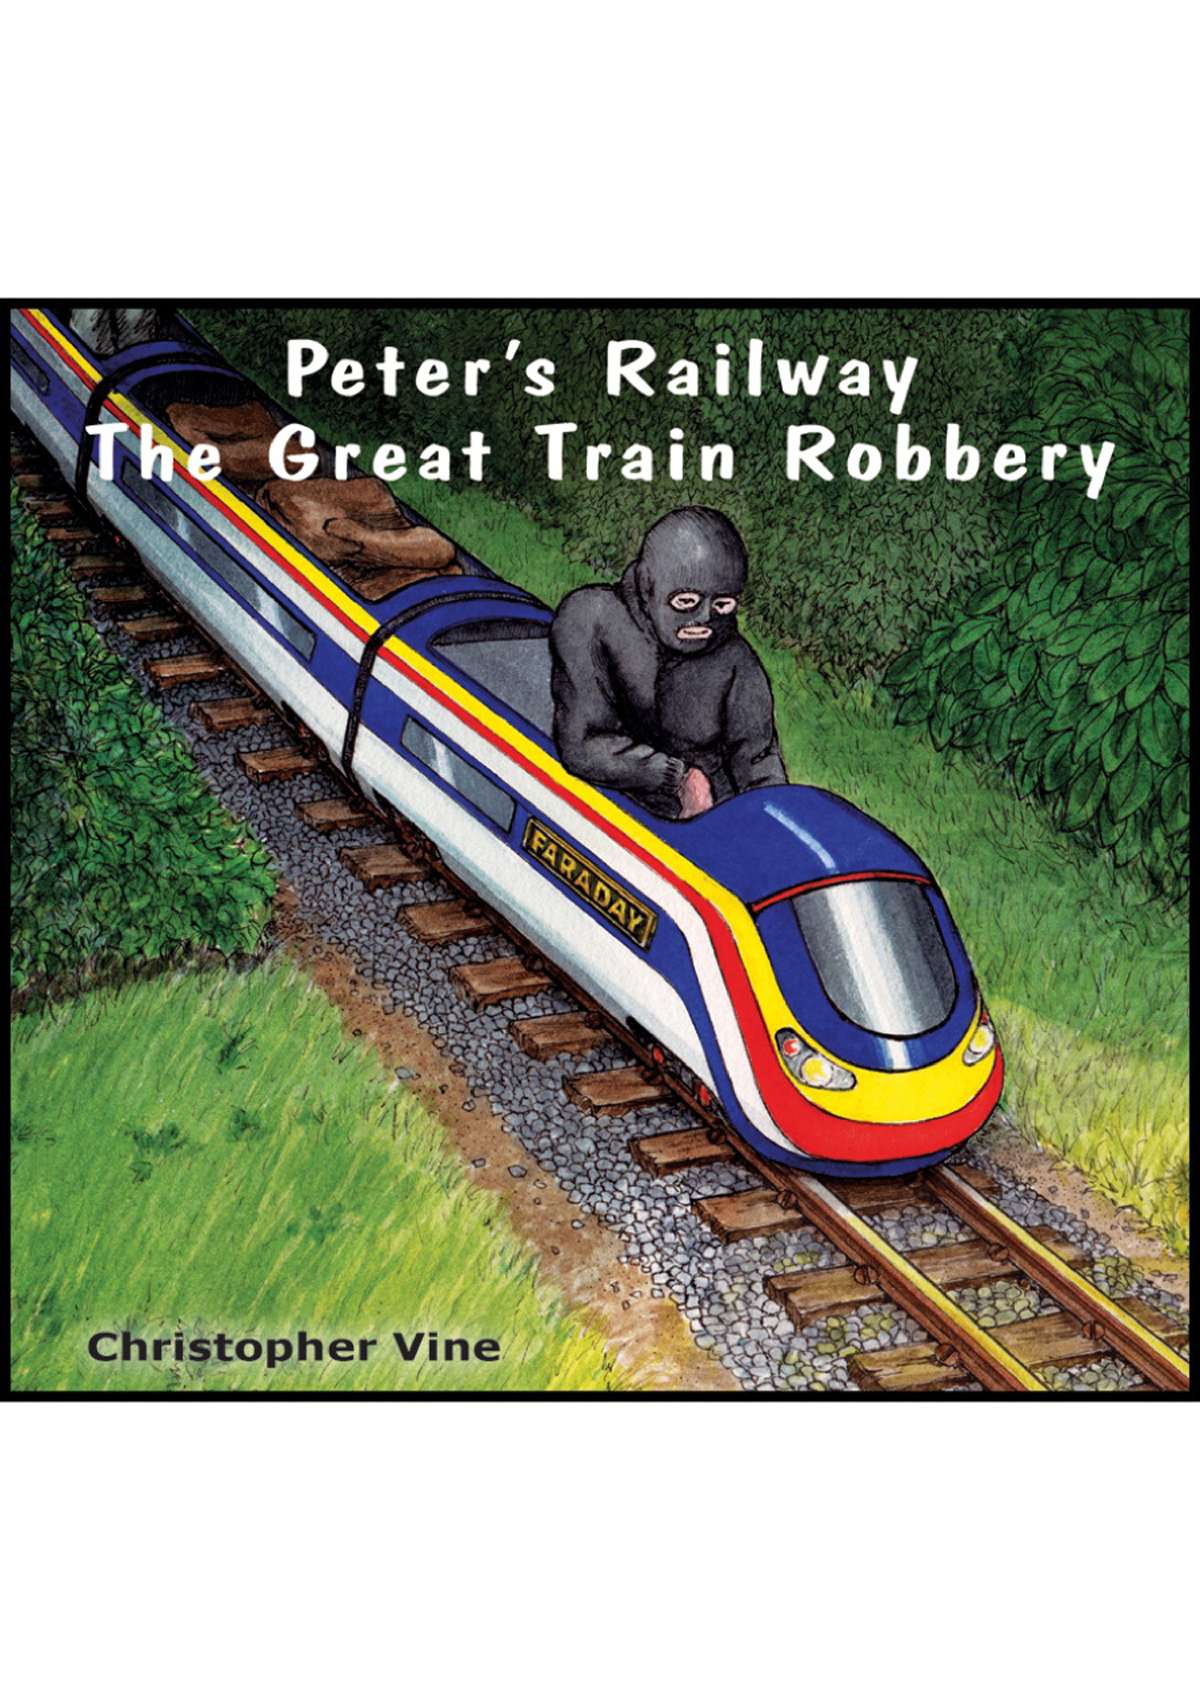 Peter's Railway - The Great Train Robbery